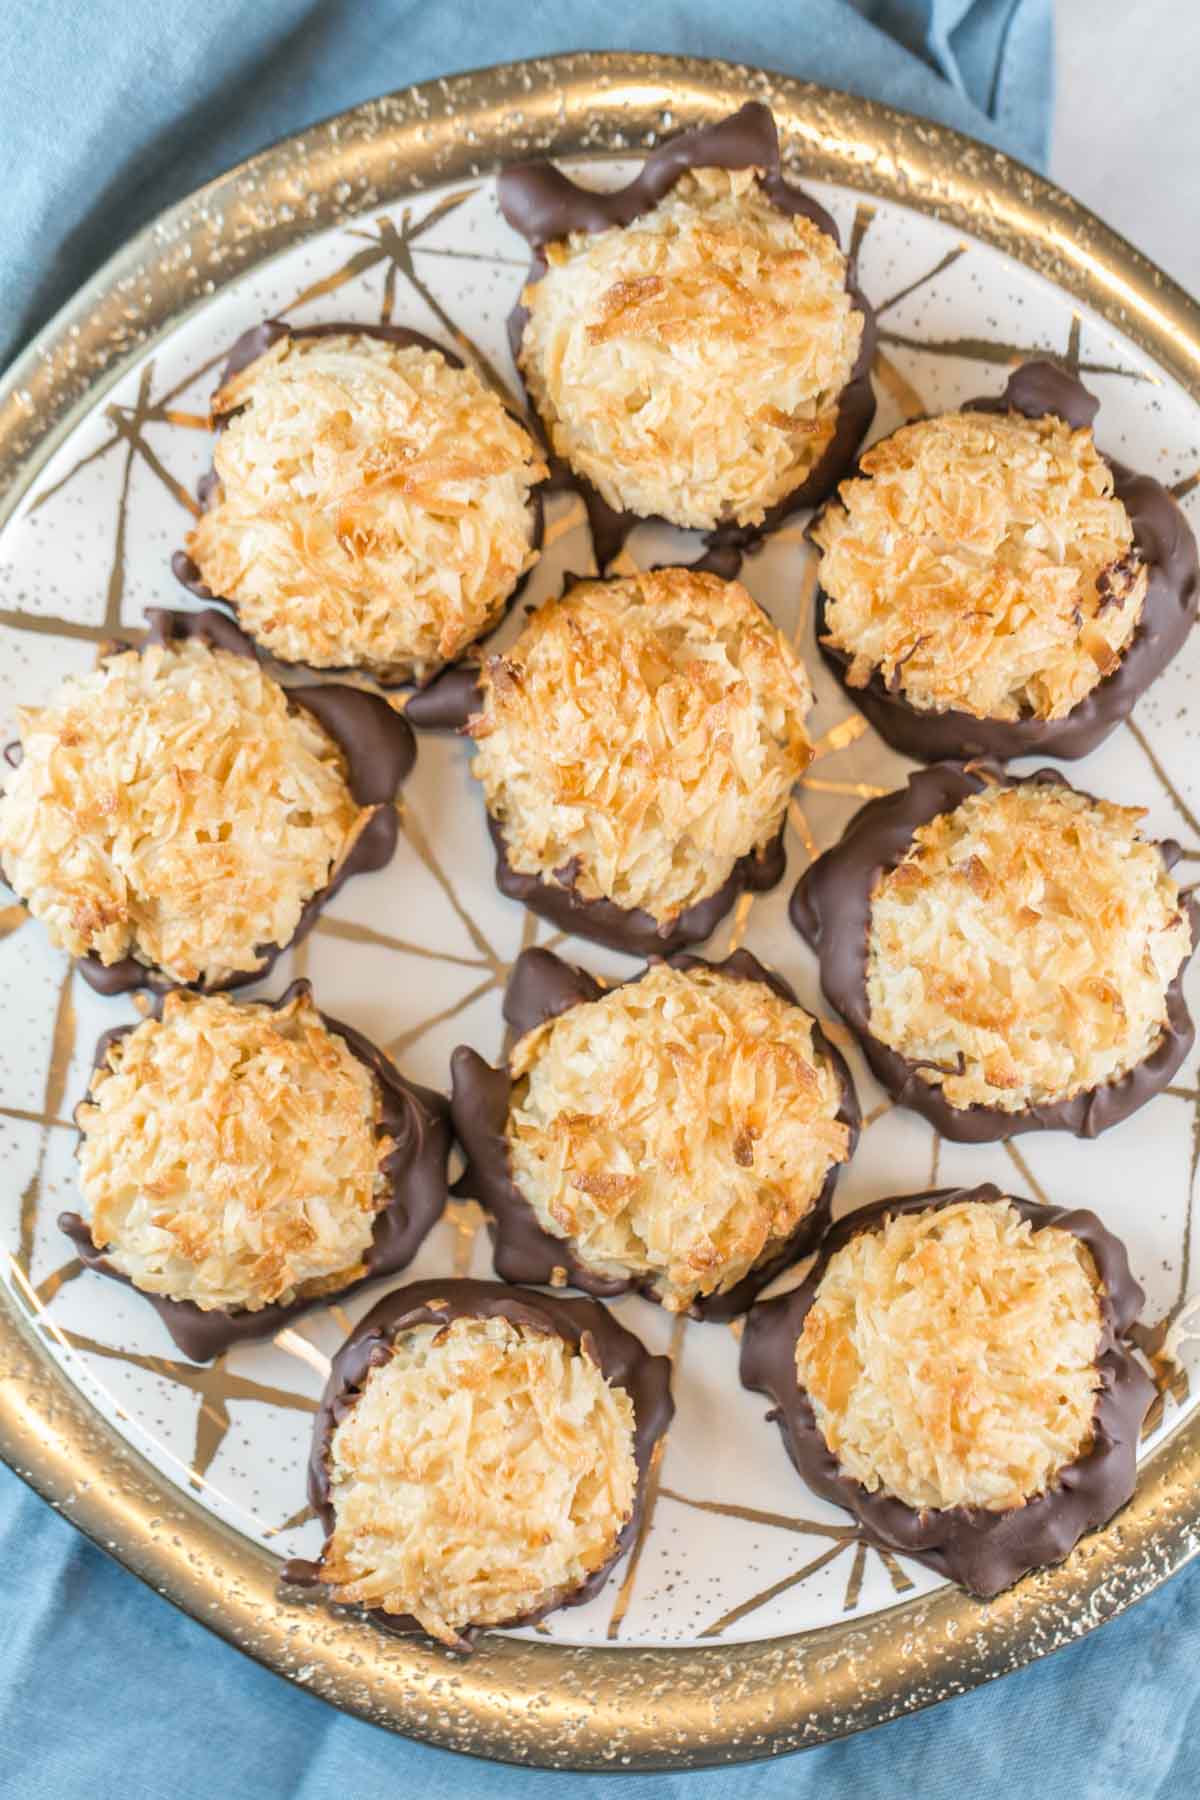 a decorative gold plate filled with chocolate dipped coconut macaroons